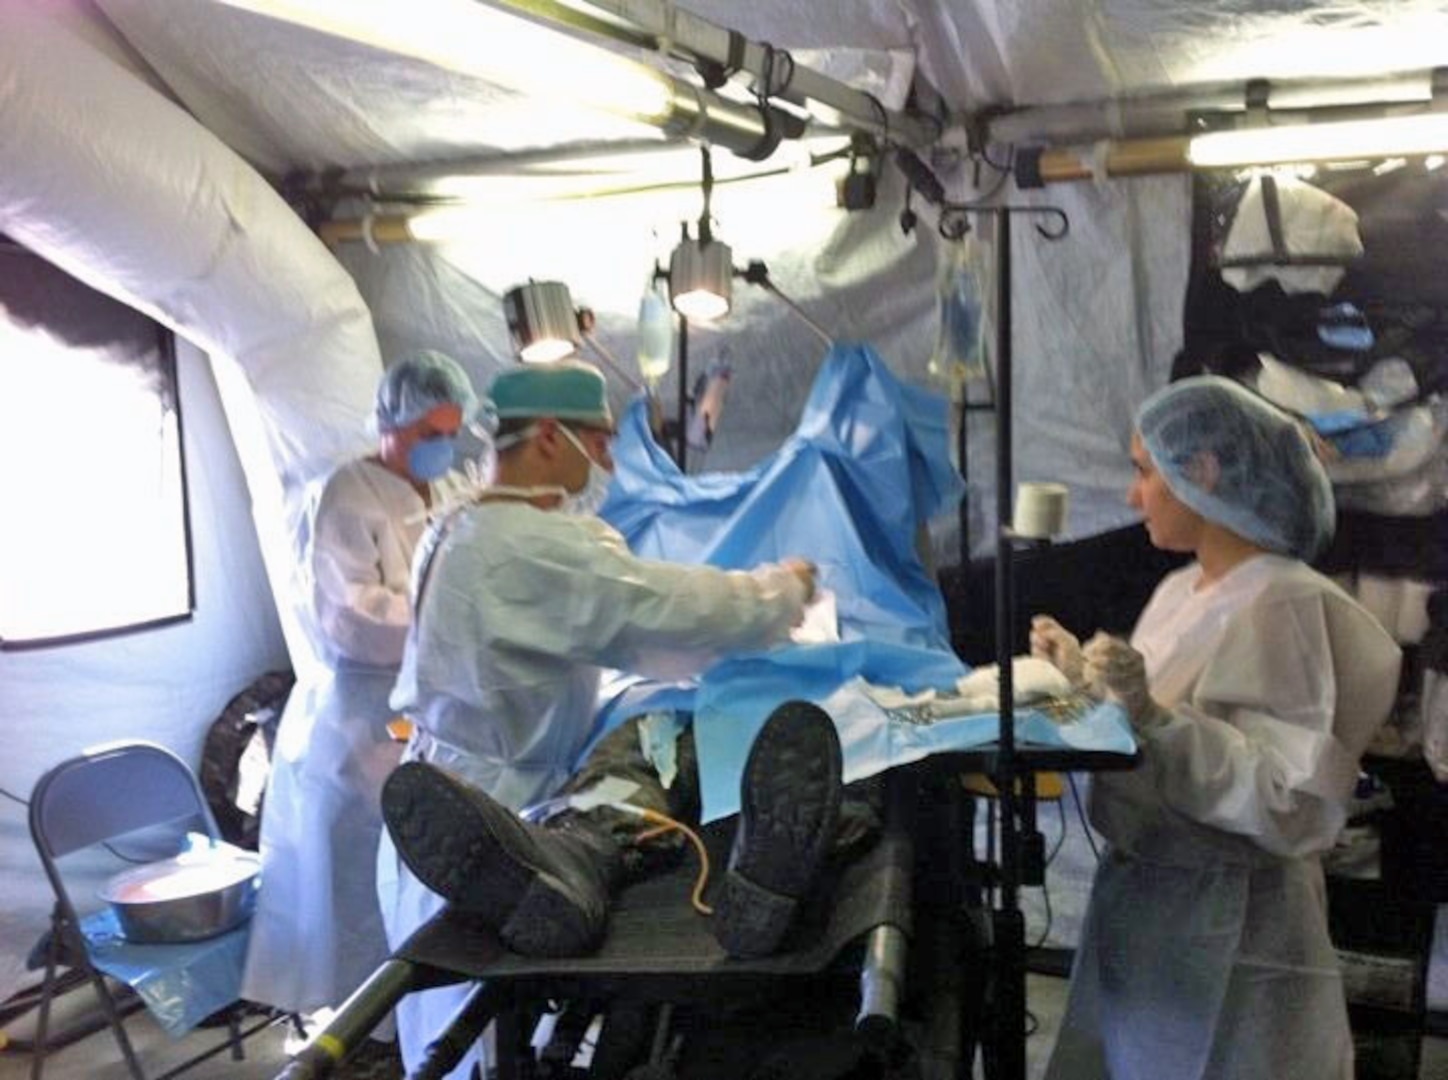 A team of Armenian surgeons simulates a field surgery in an expeditionary medical support system during a three-day exercise near Zarh, Armenia, Sept. 3, 2010. It was the first time the Armenian military had deployed EMEDS to the field.